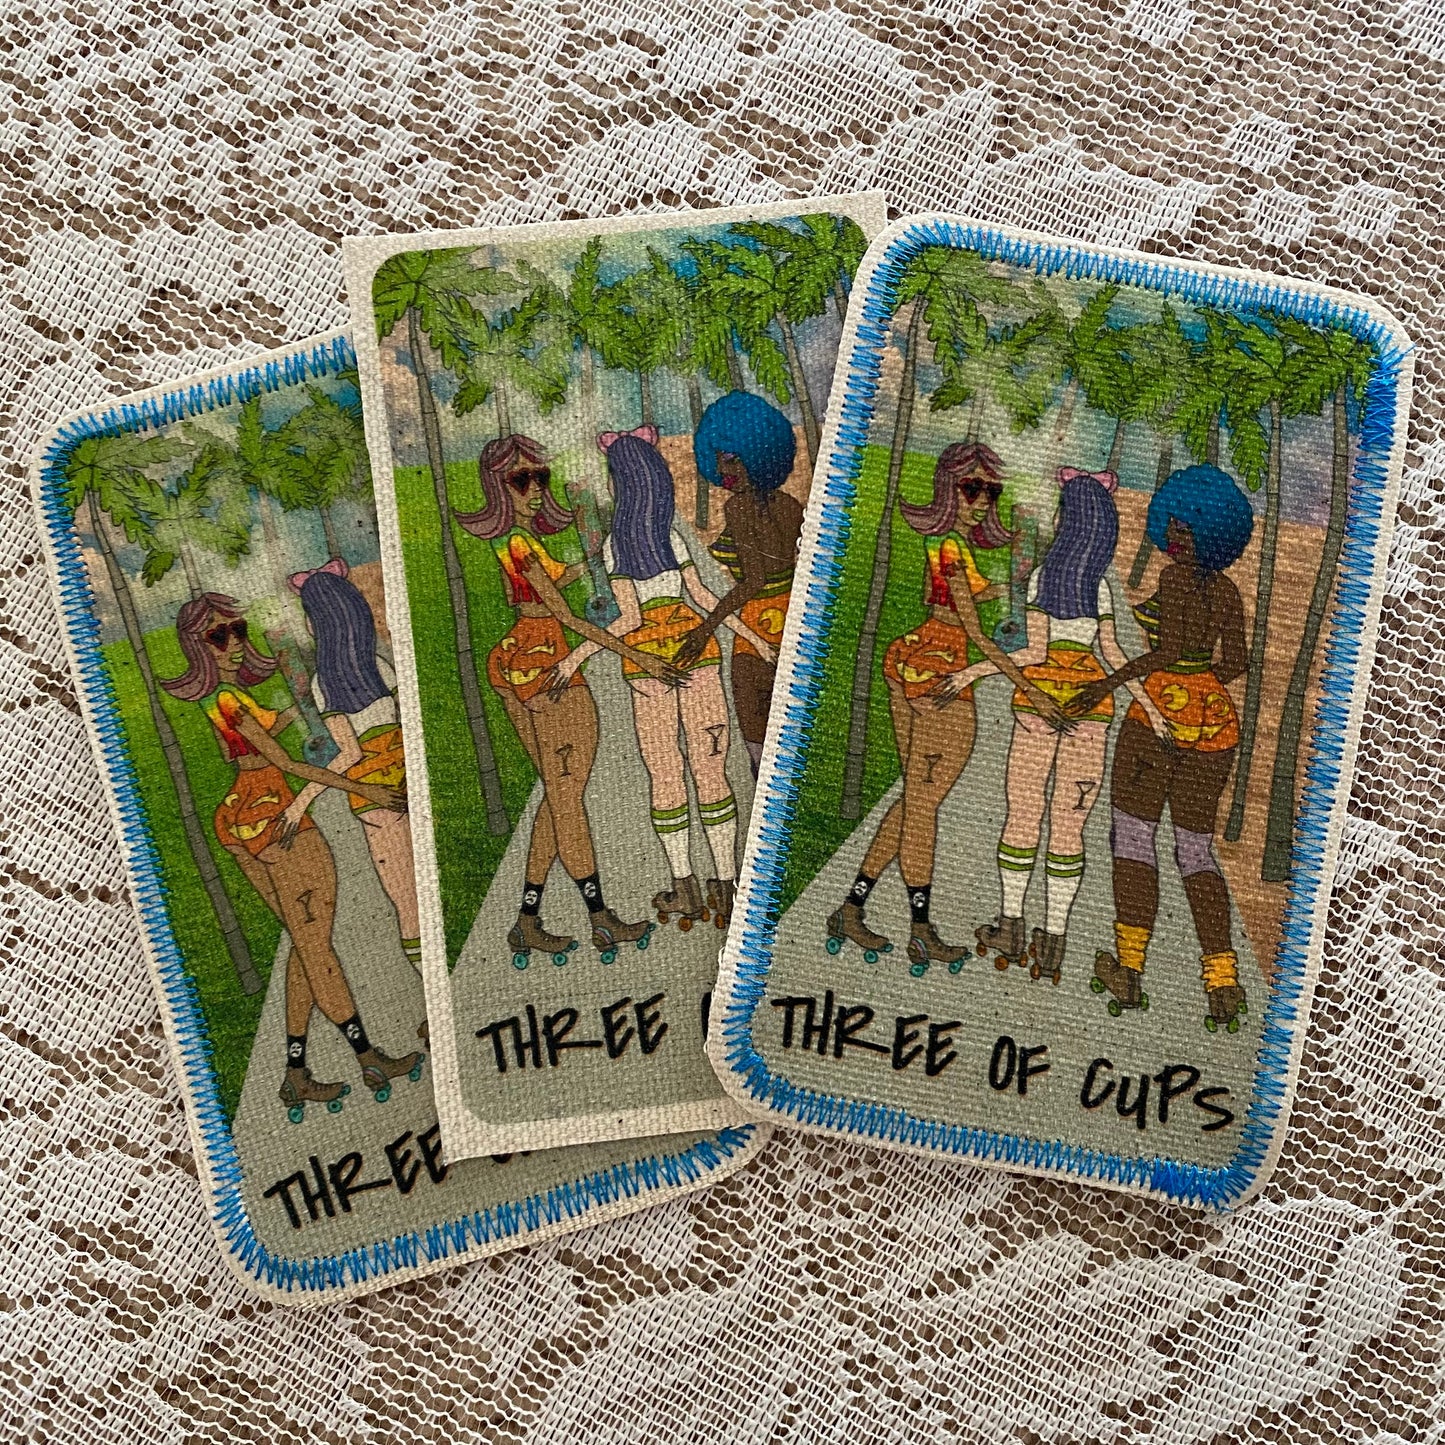 threee of cups canvas patch